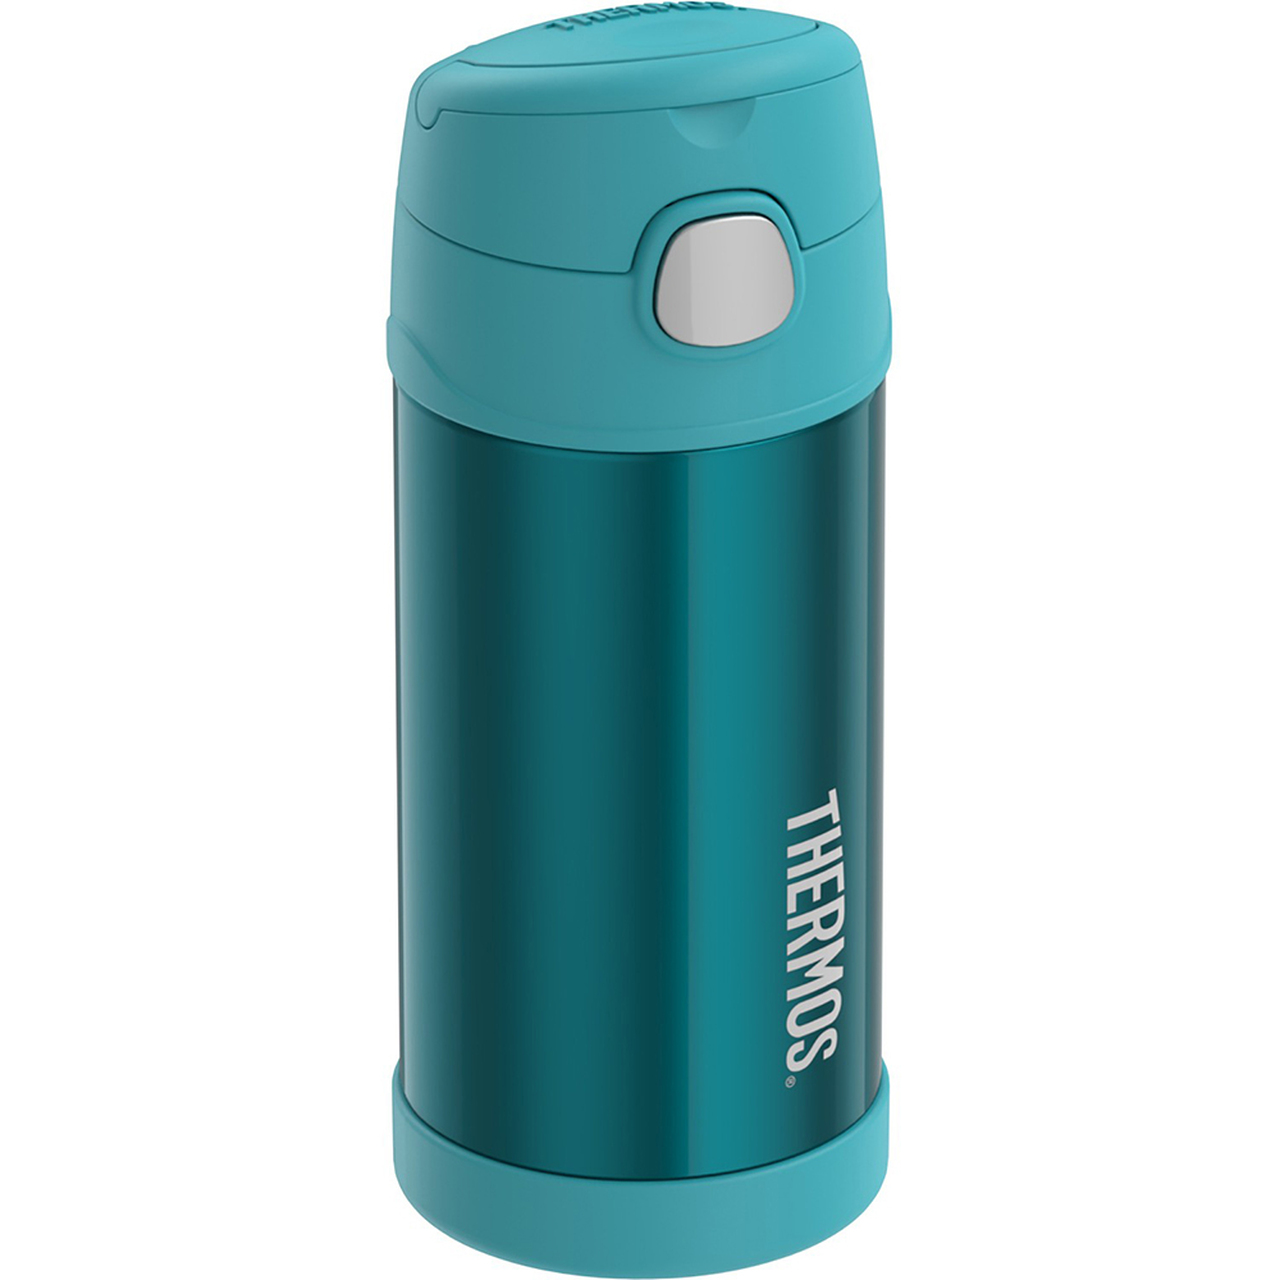 Thermos, 12 oz, Teal, Stainless Steel Fun Bottle